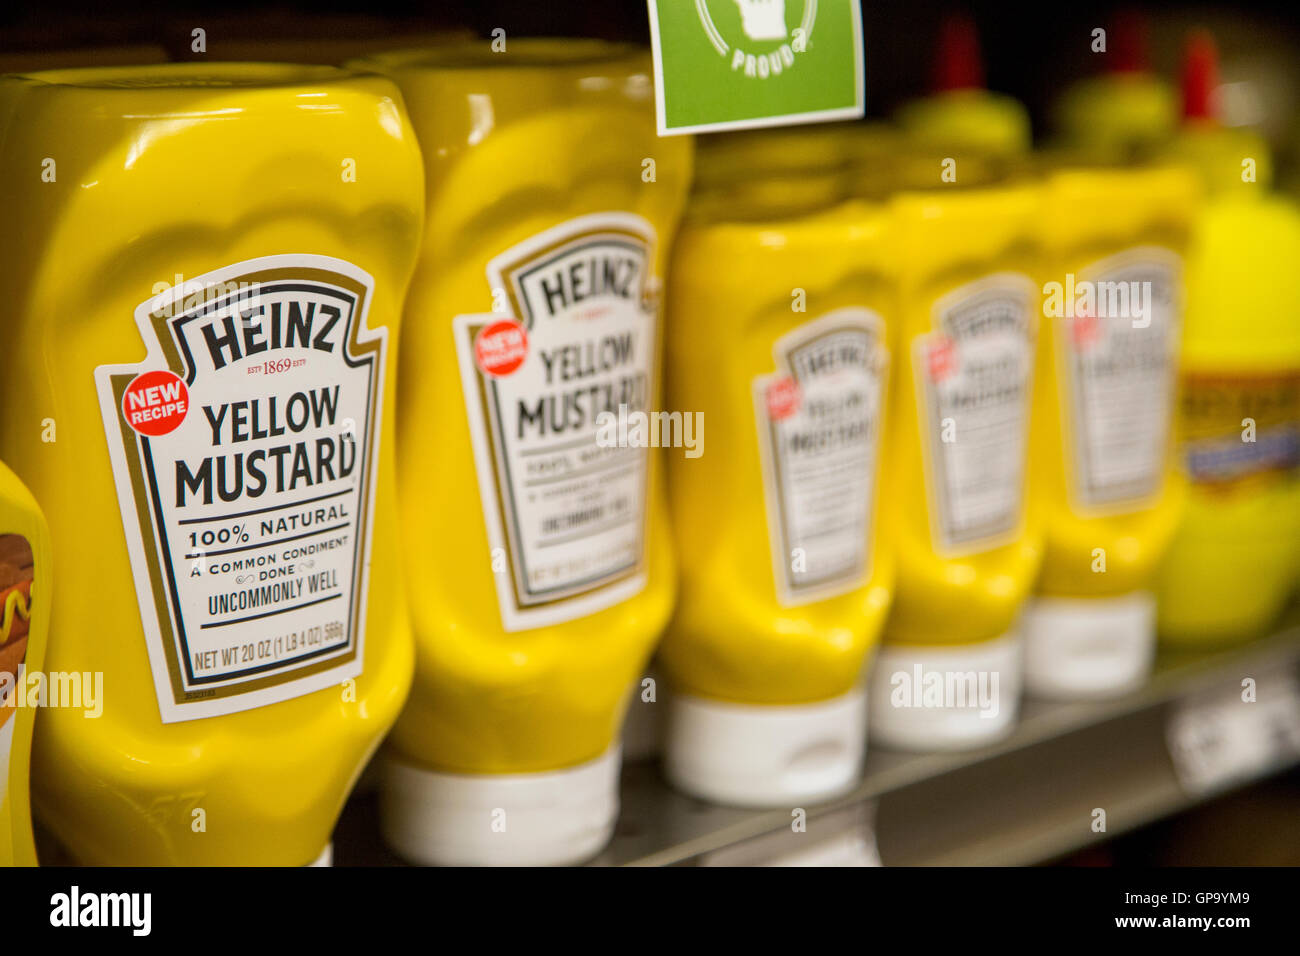 A row of Heinz yellow mustard plastic squeeze bottles on the shelf of a grocery store. Stock Photo